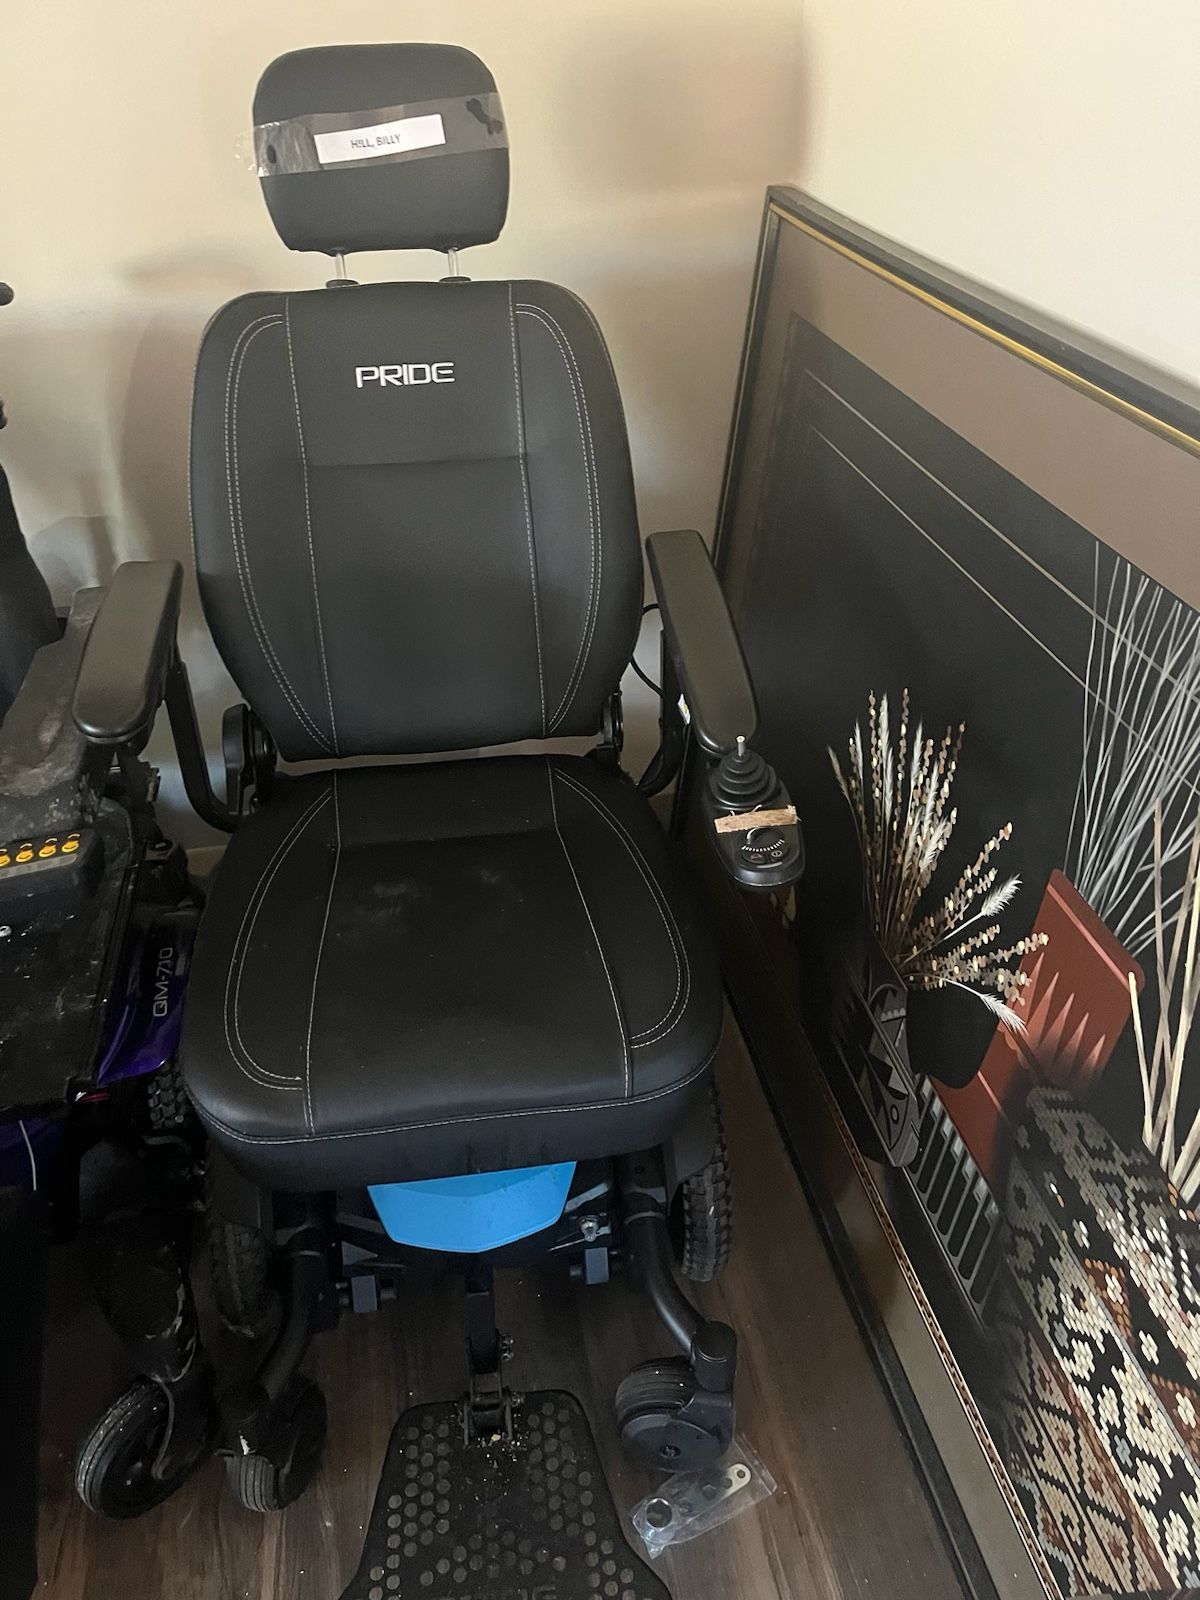 Electric Wheelchair For Sale